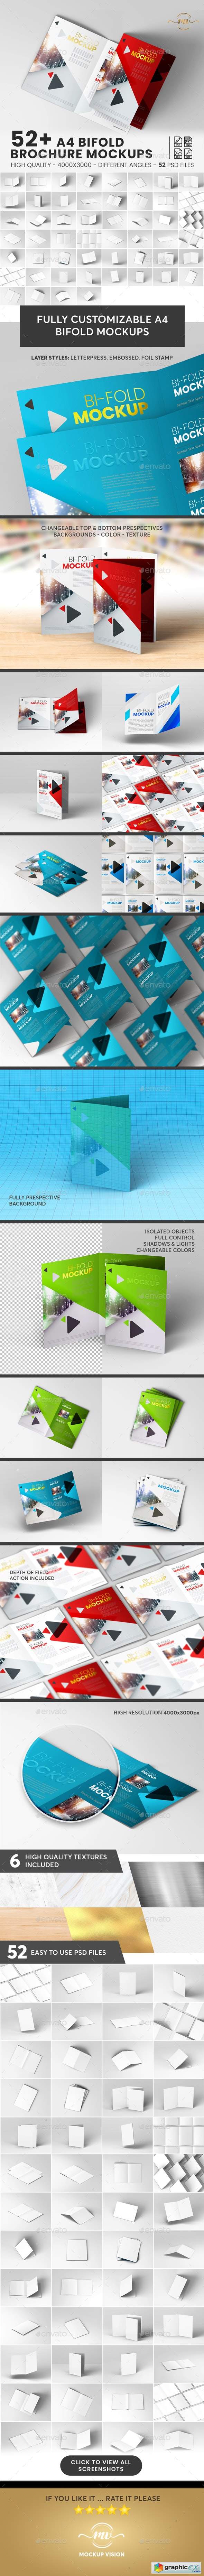 Banner Mockup Template Free Download Vector Stock Image Photoshop Icon Page 328 Chan 51791450 Rssing Com